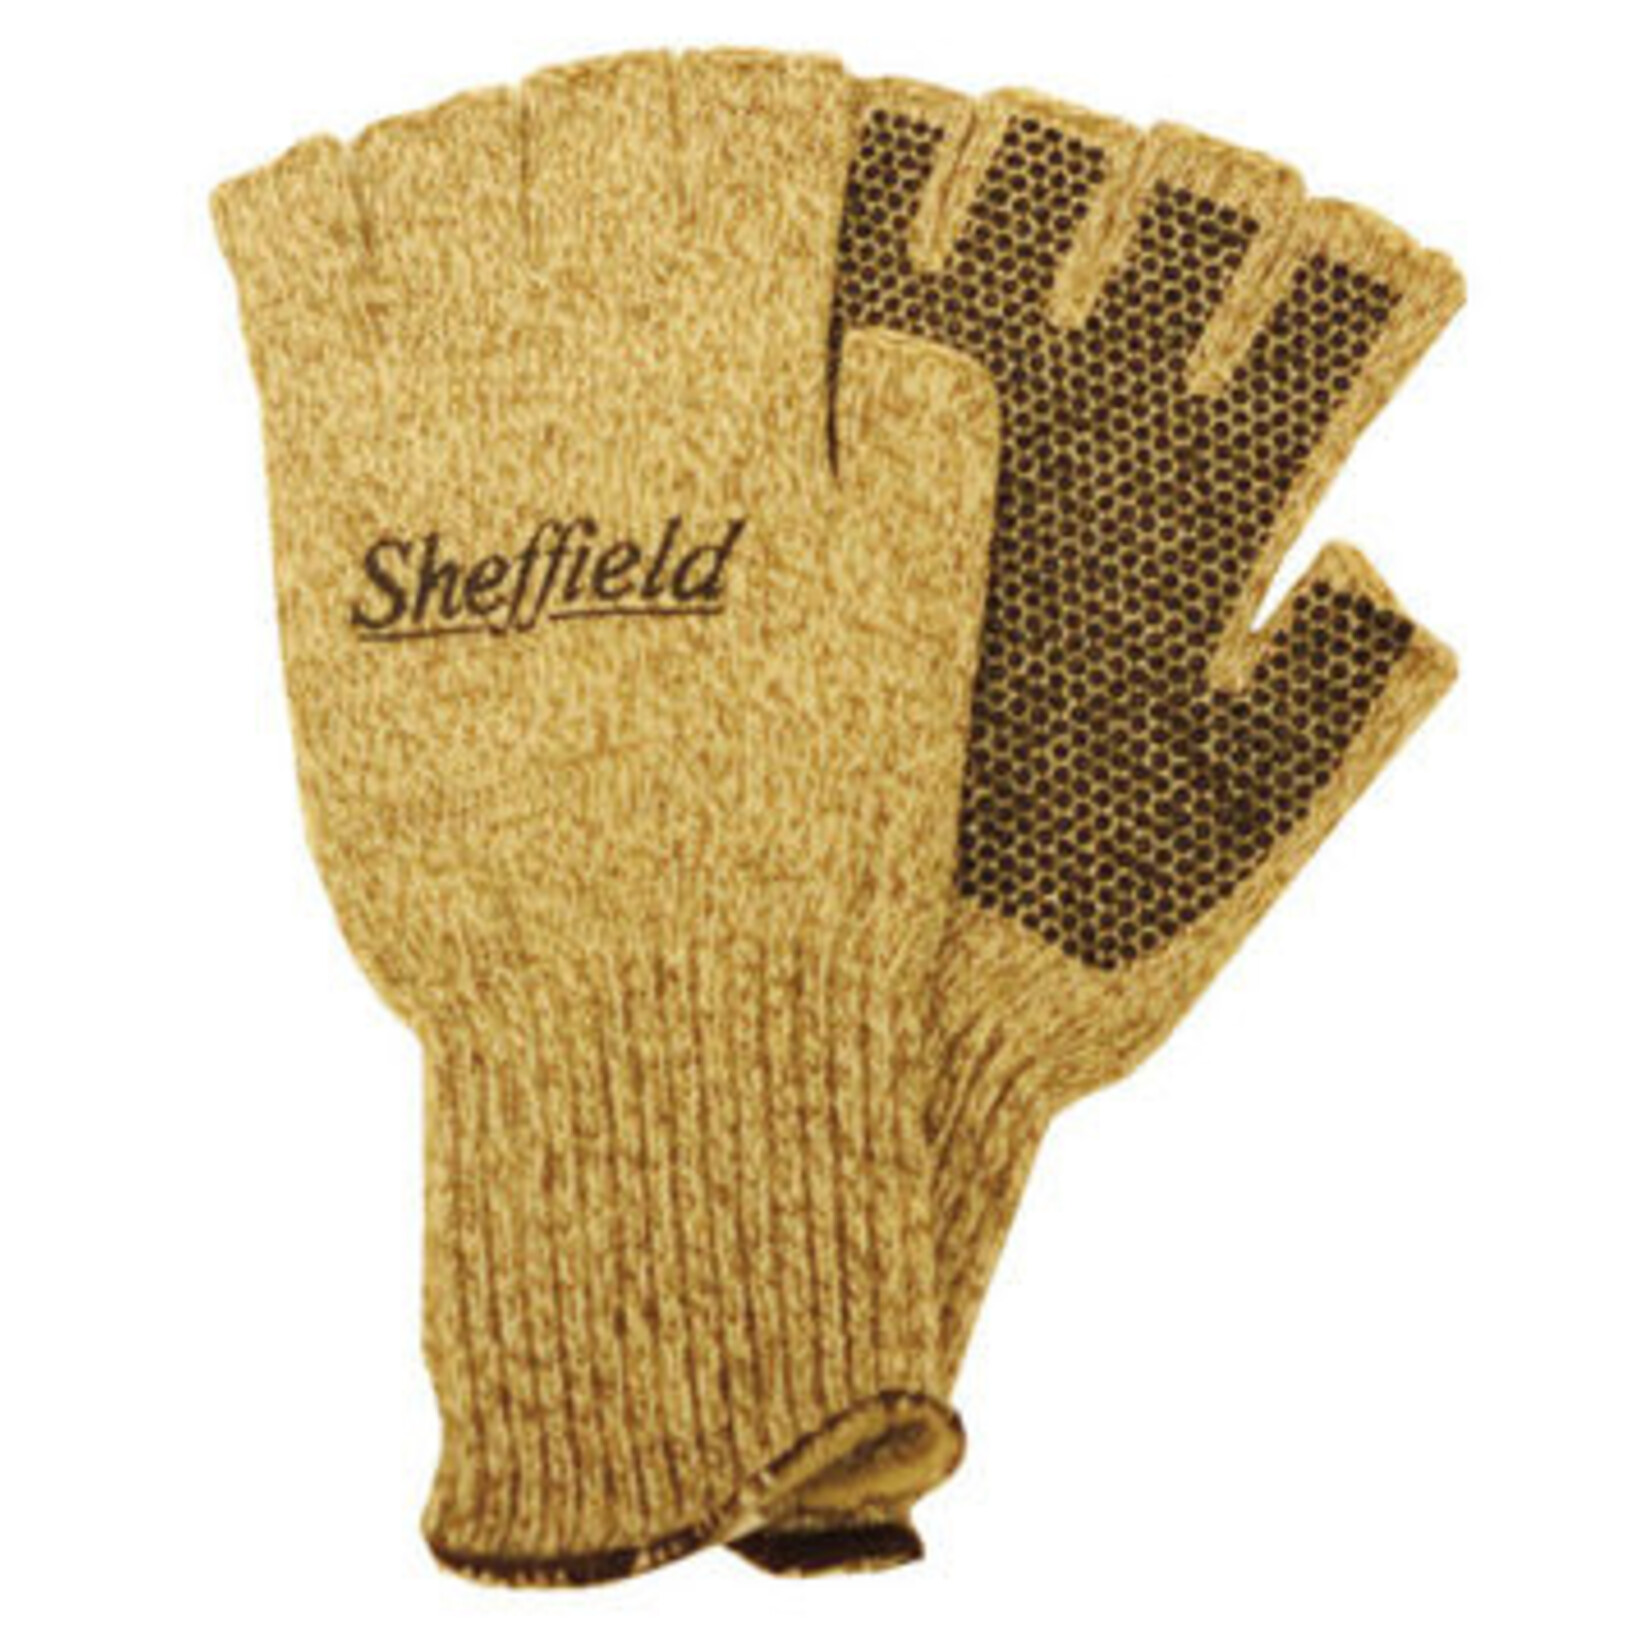 Sheffield Fishing Products Sheffield Gloves